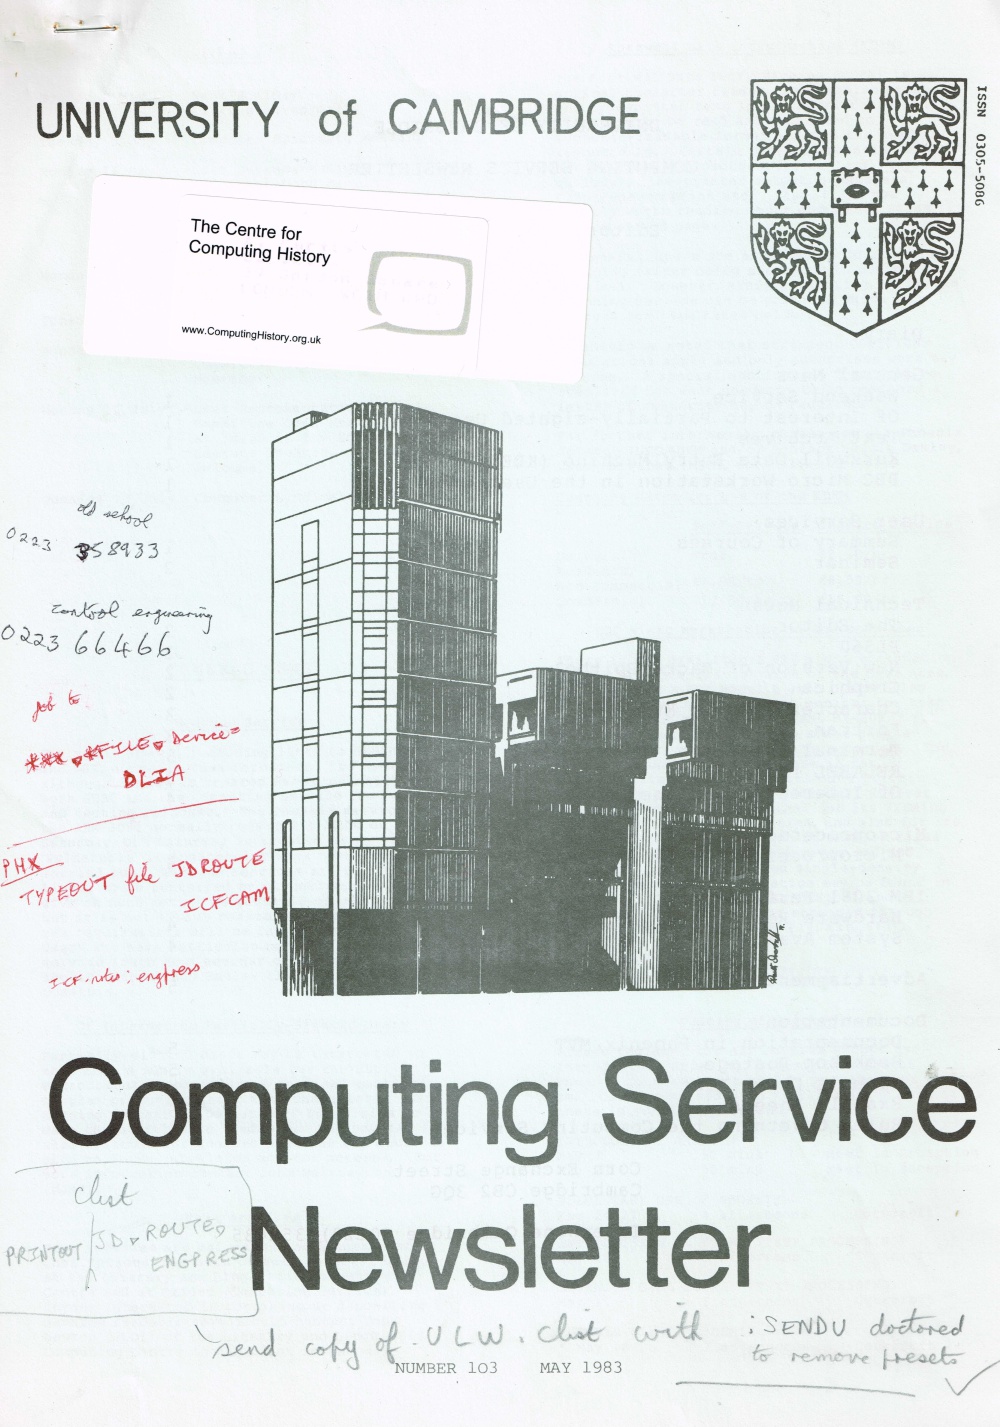 Article: University of Cambridge Computing Service May 1983 Newsletter 103